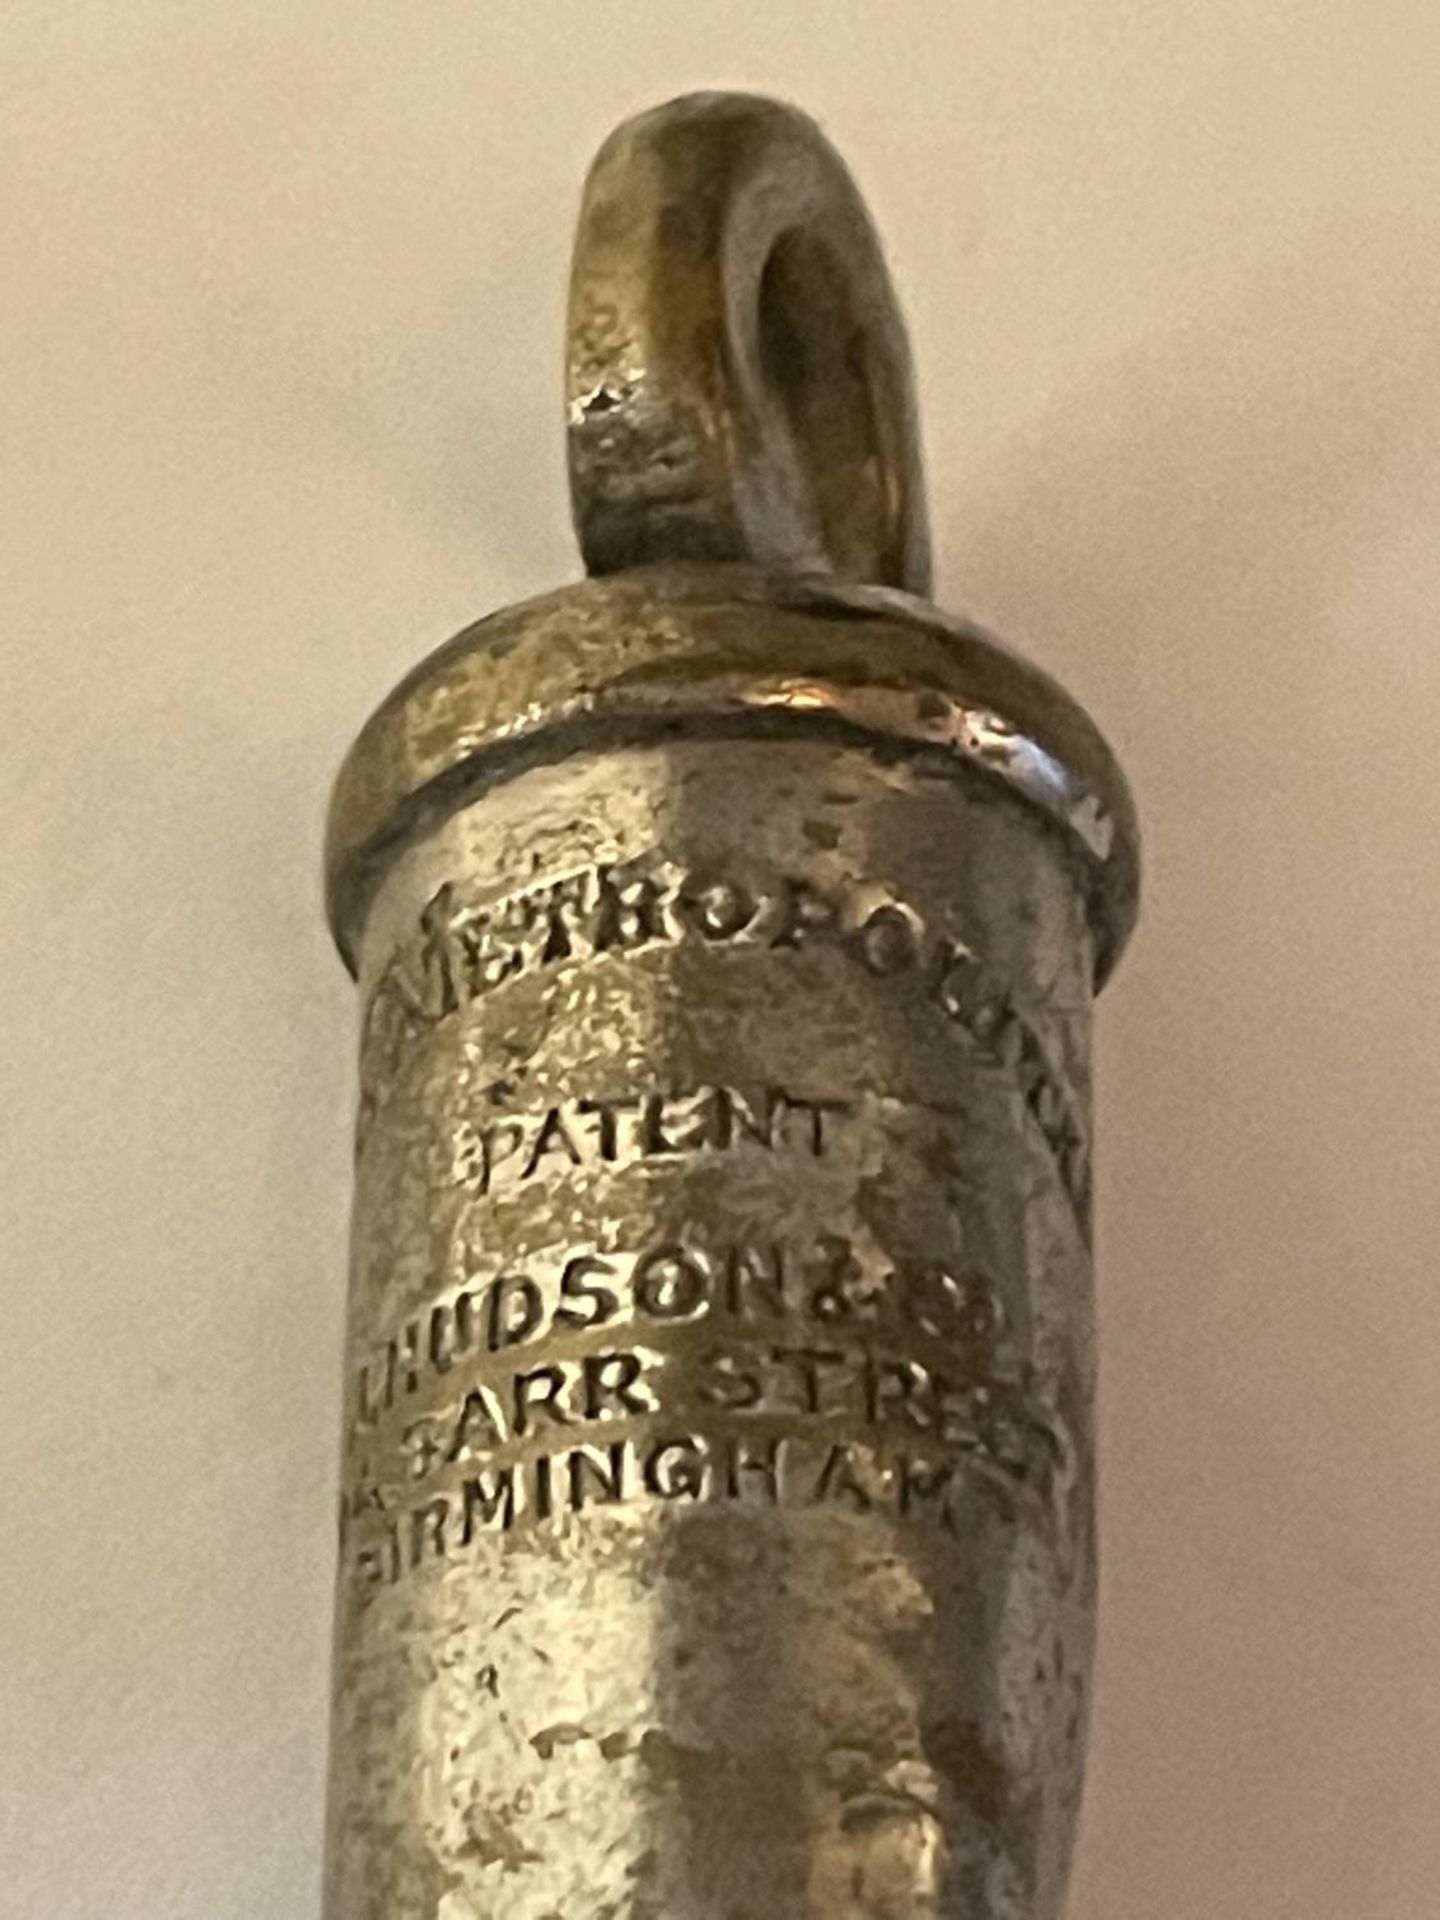 A RARE METROPOLITAN POLICE WHISTLE 1908 BY J HUDSON AND CO - Image 2 of 2